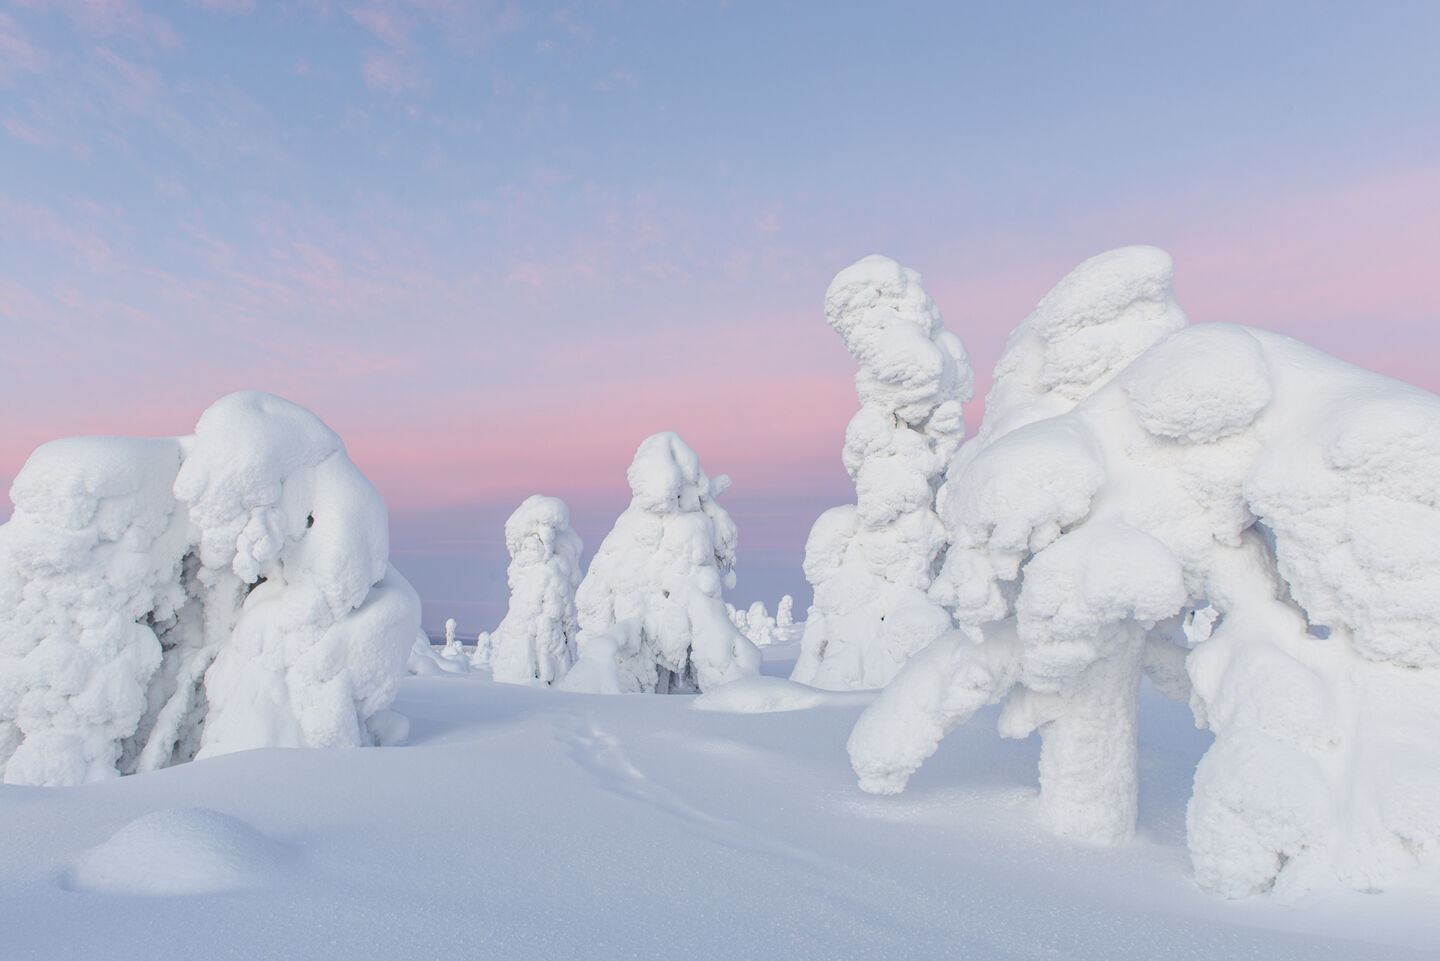 A snowy winter scene, just one of the seasons & weather in Arctic Lapland